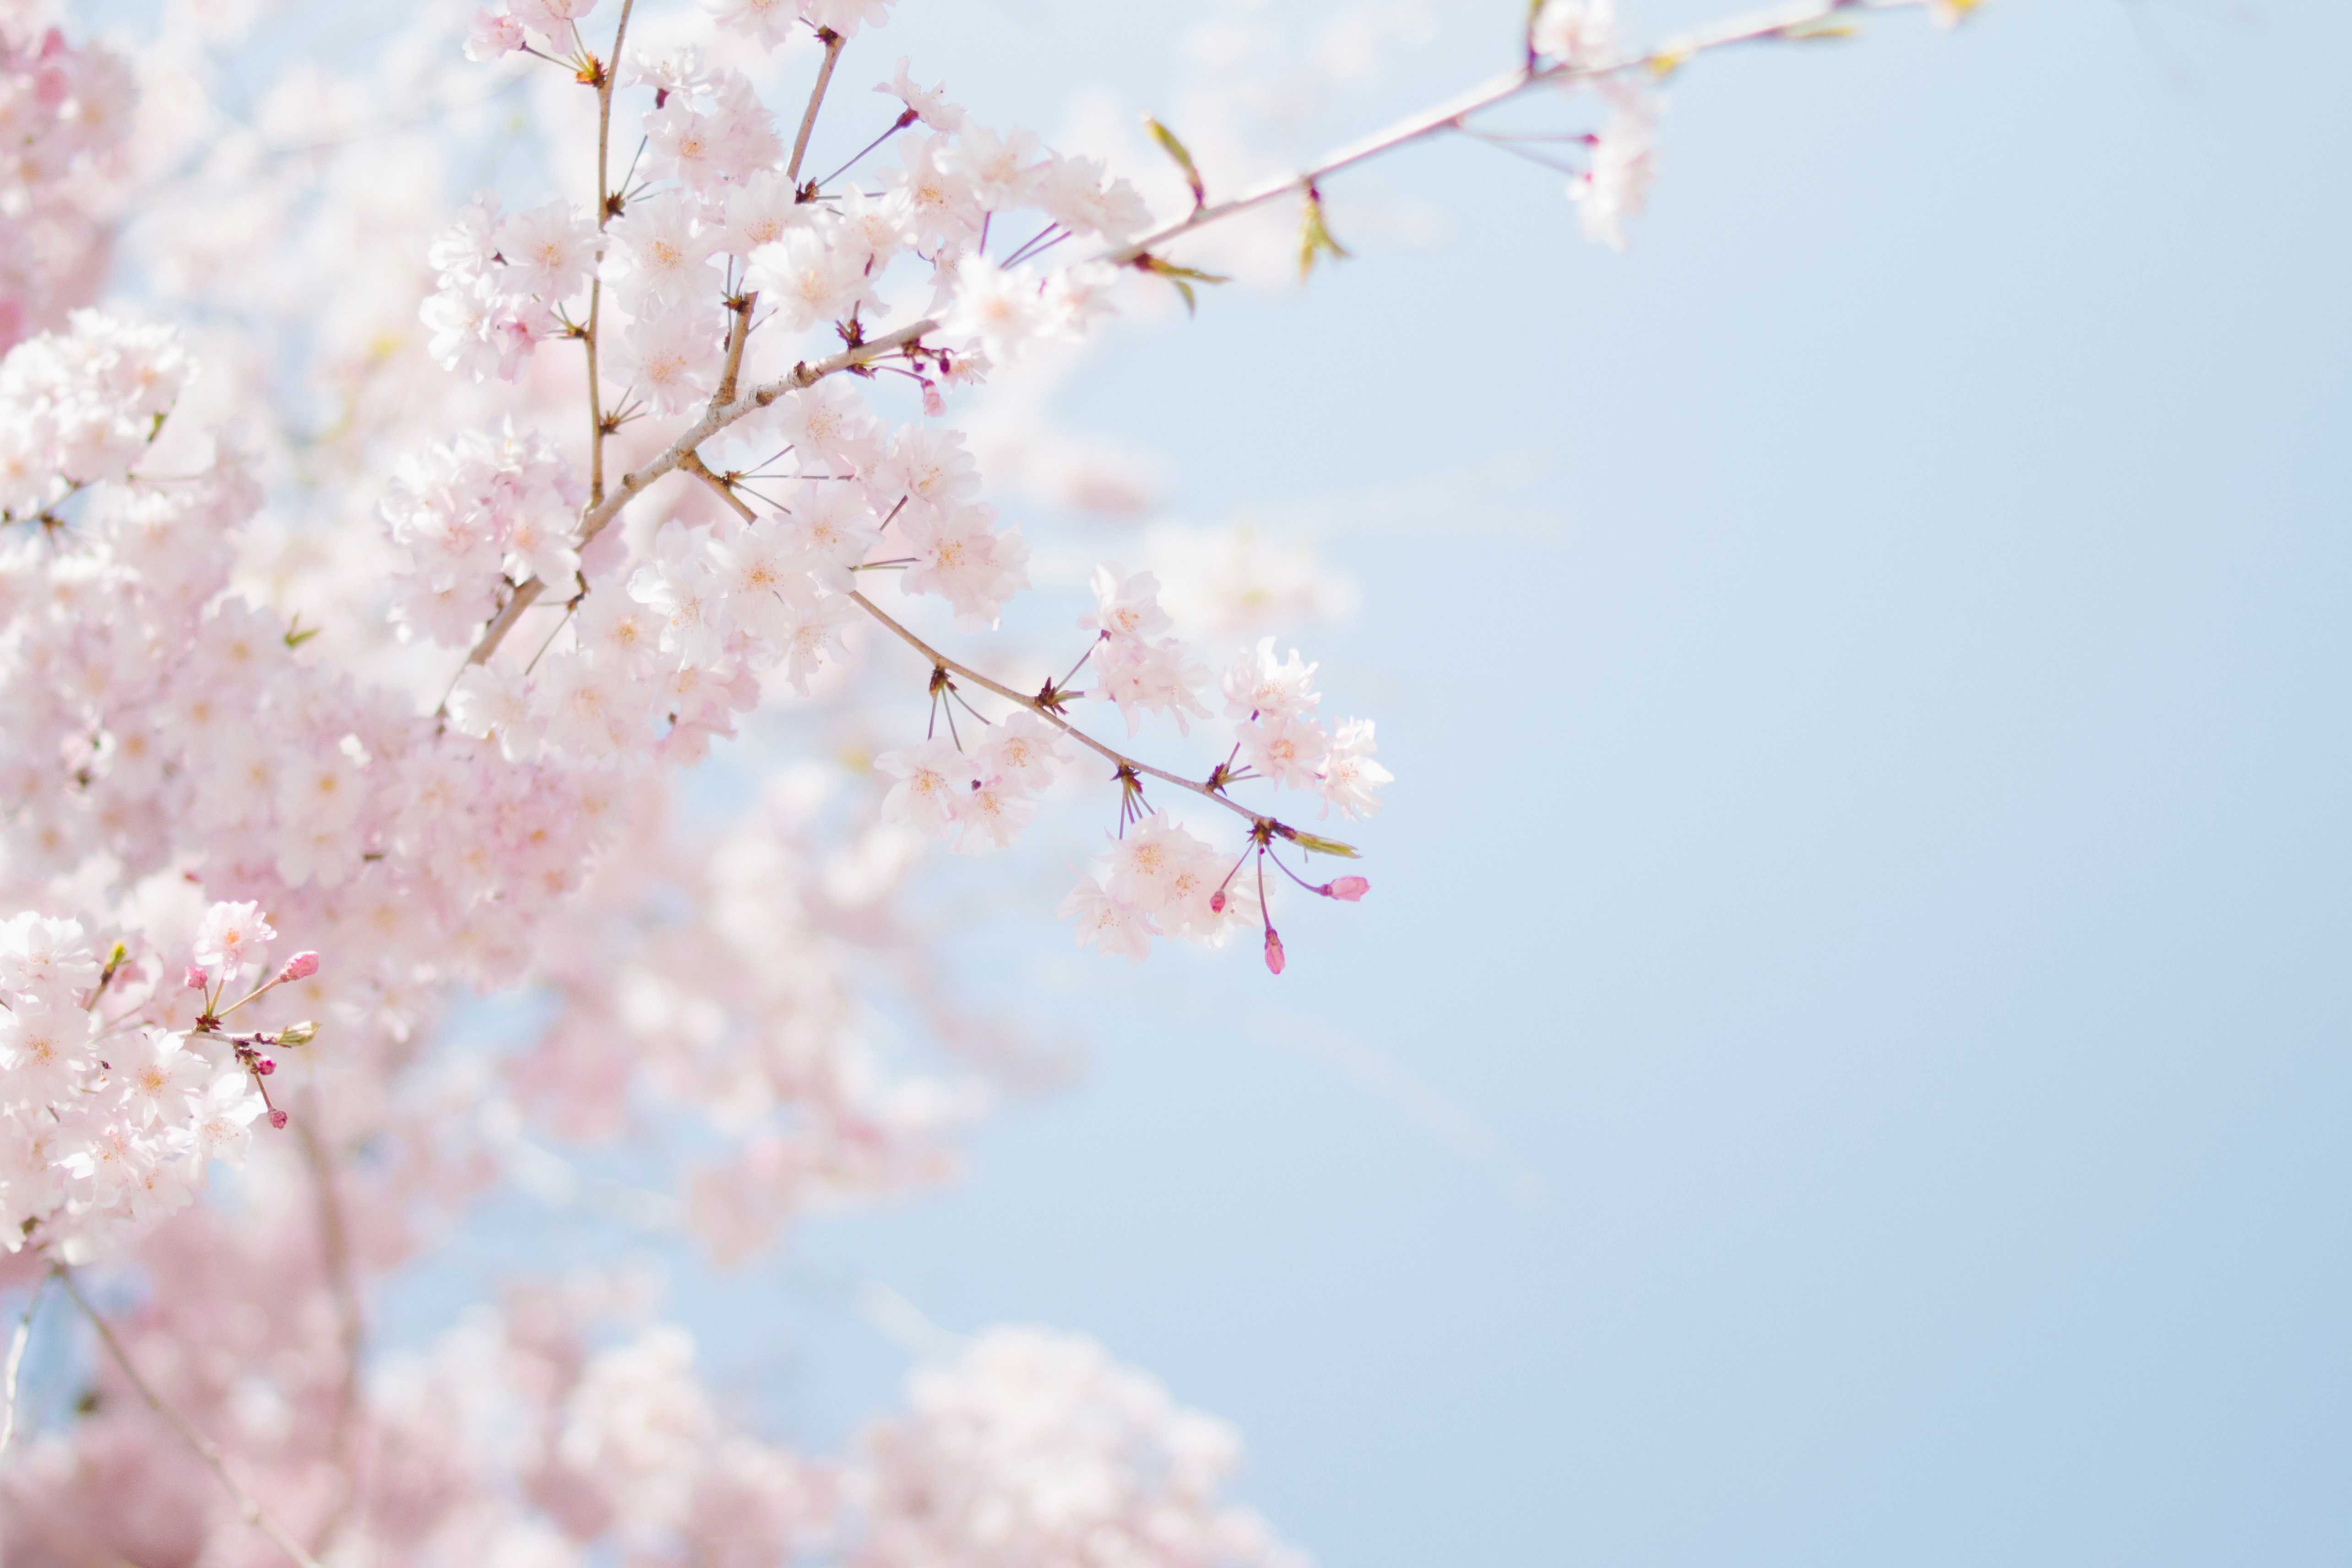 Baby pink cherry blossom tree against clear blue sky